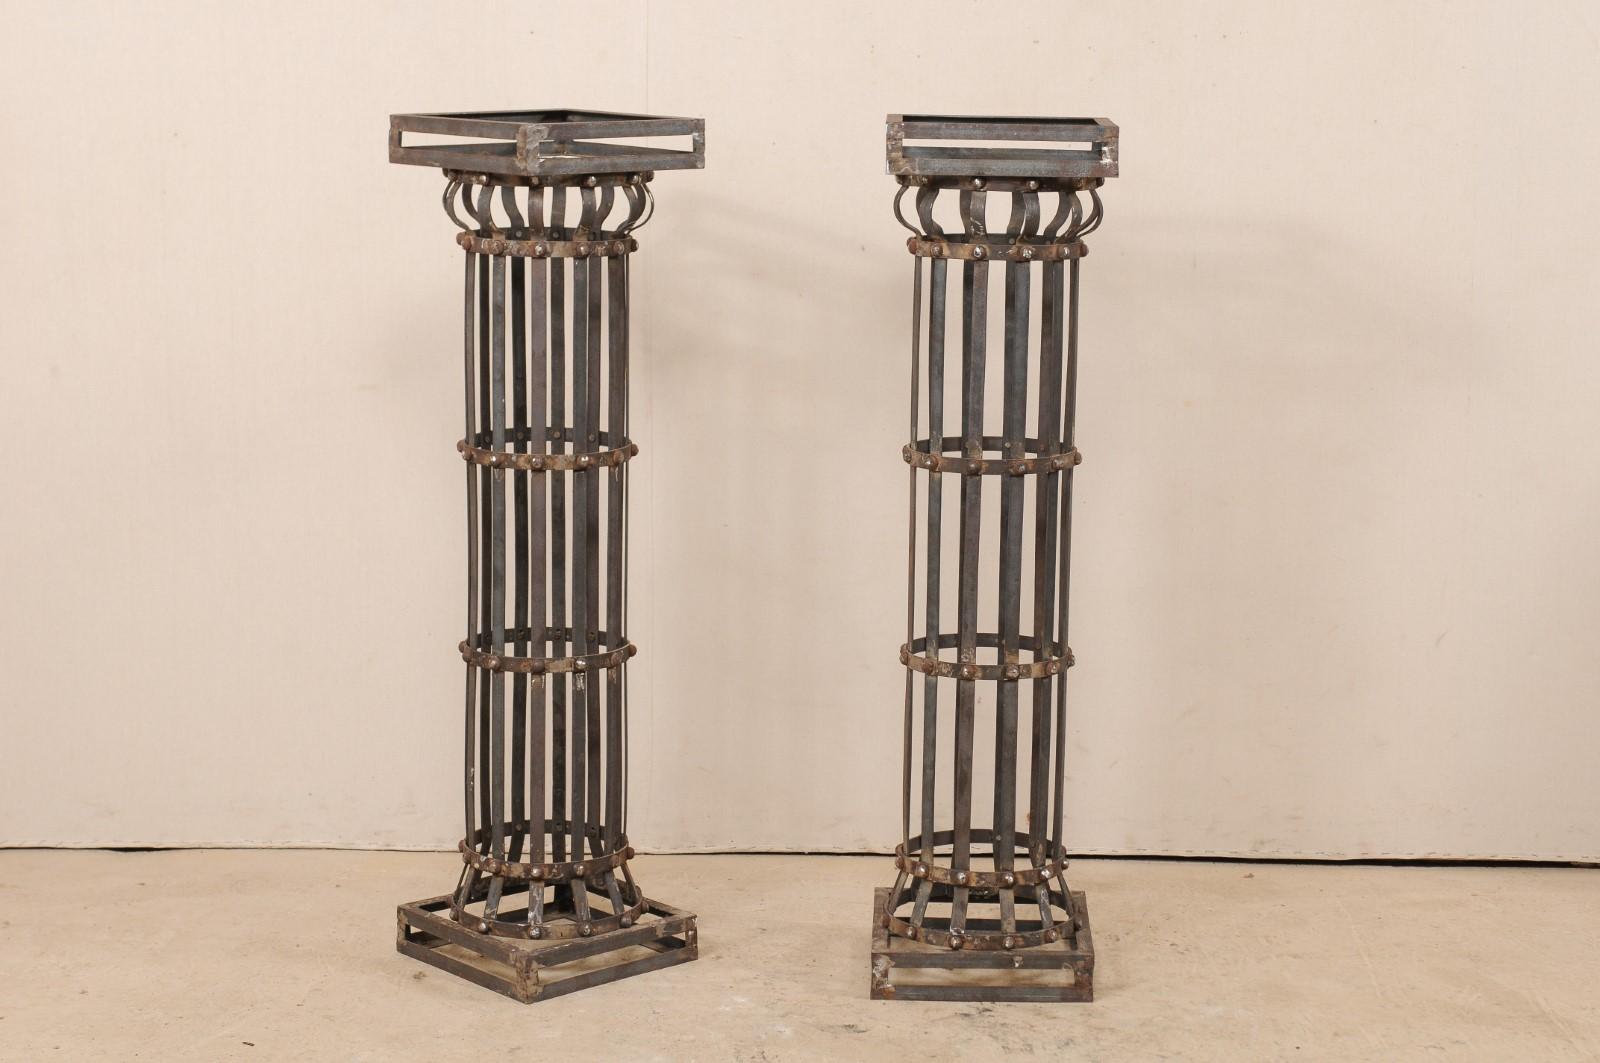 A pair of contemporary American iron architectural columns. This pair of vintage columns feature a round shaped shaft, comprised of vertically set iron strips, with a square-shaped capital and base, and stand at approximately 4.25 feet in height.